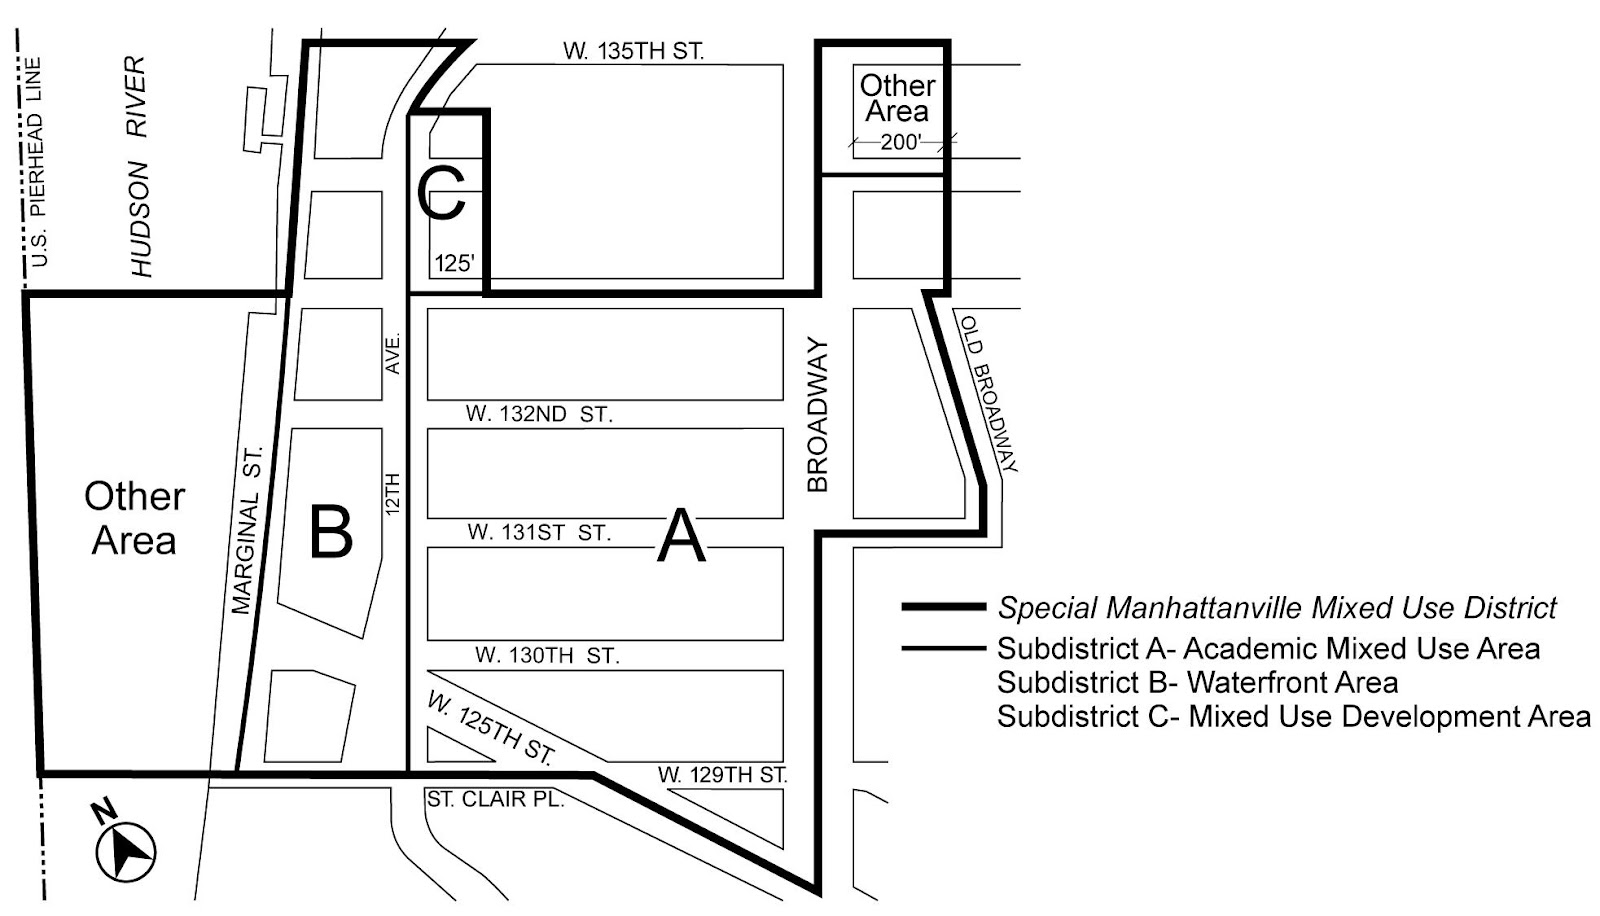 Zoning Resolutions Chapter 4: Special Manhattanville Mixed Use District Appendix A.0